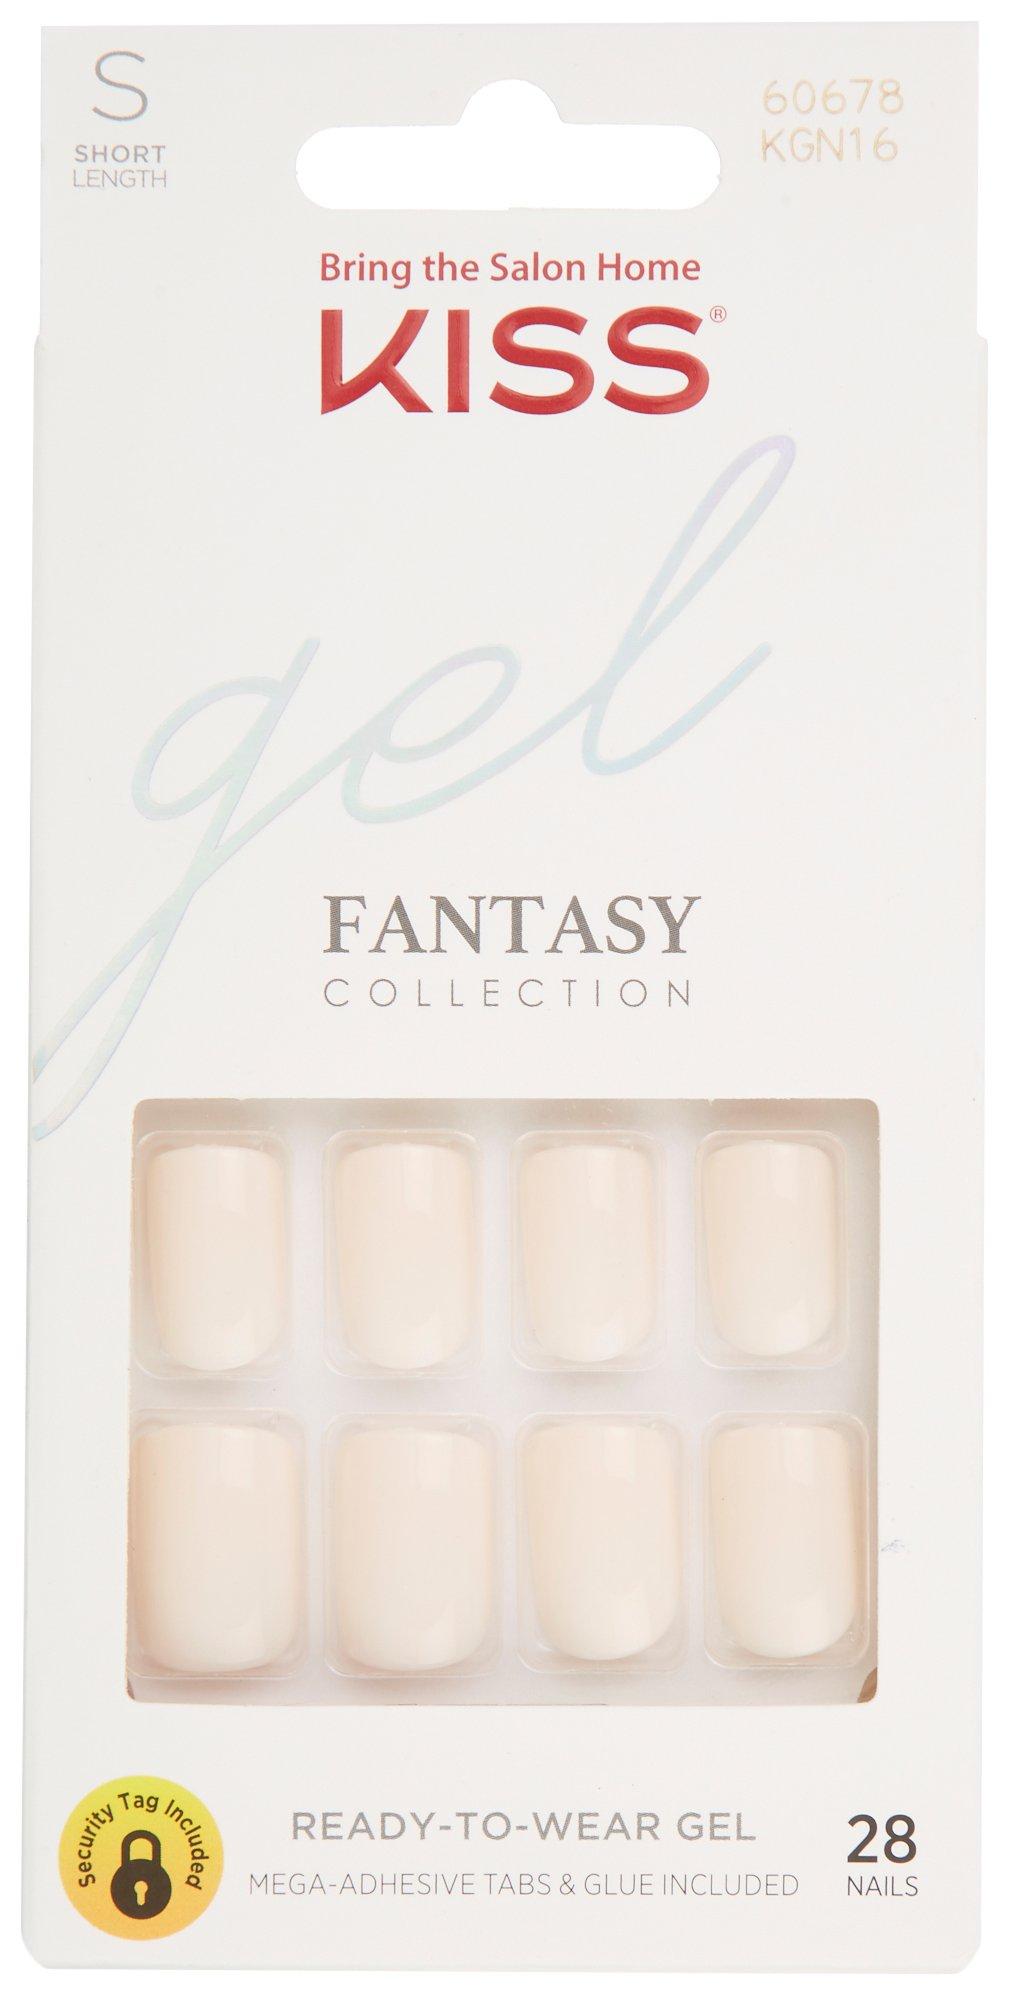 Kiss Fantasy Collection Gel Press On Short Length Manicure